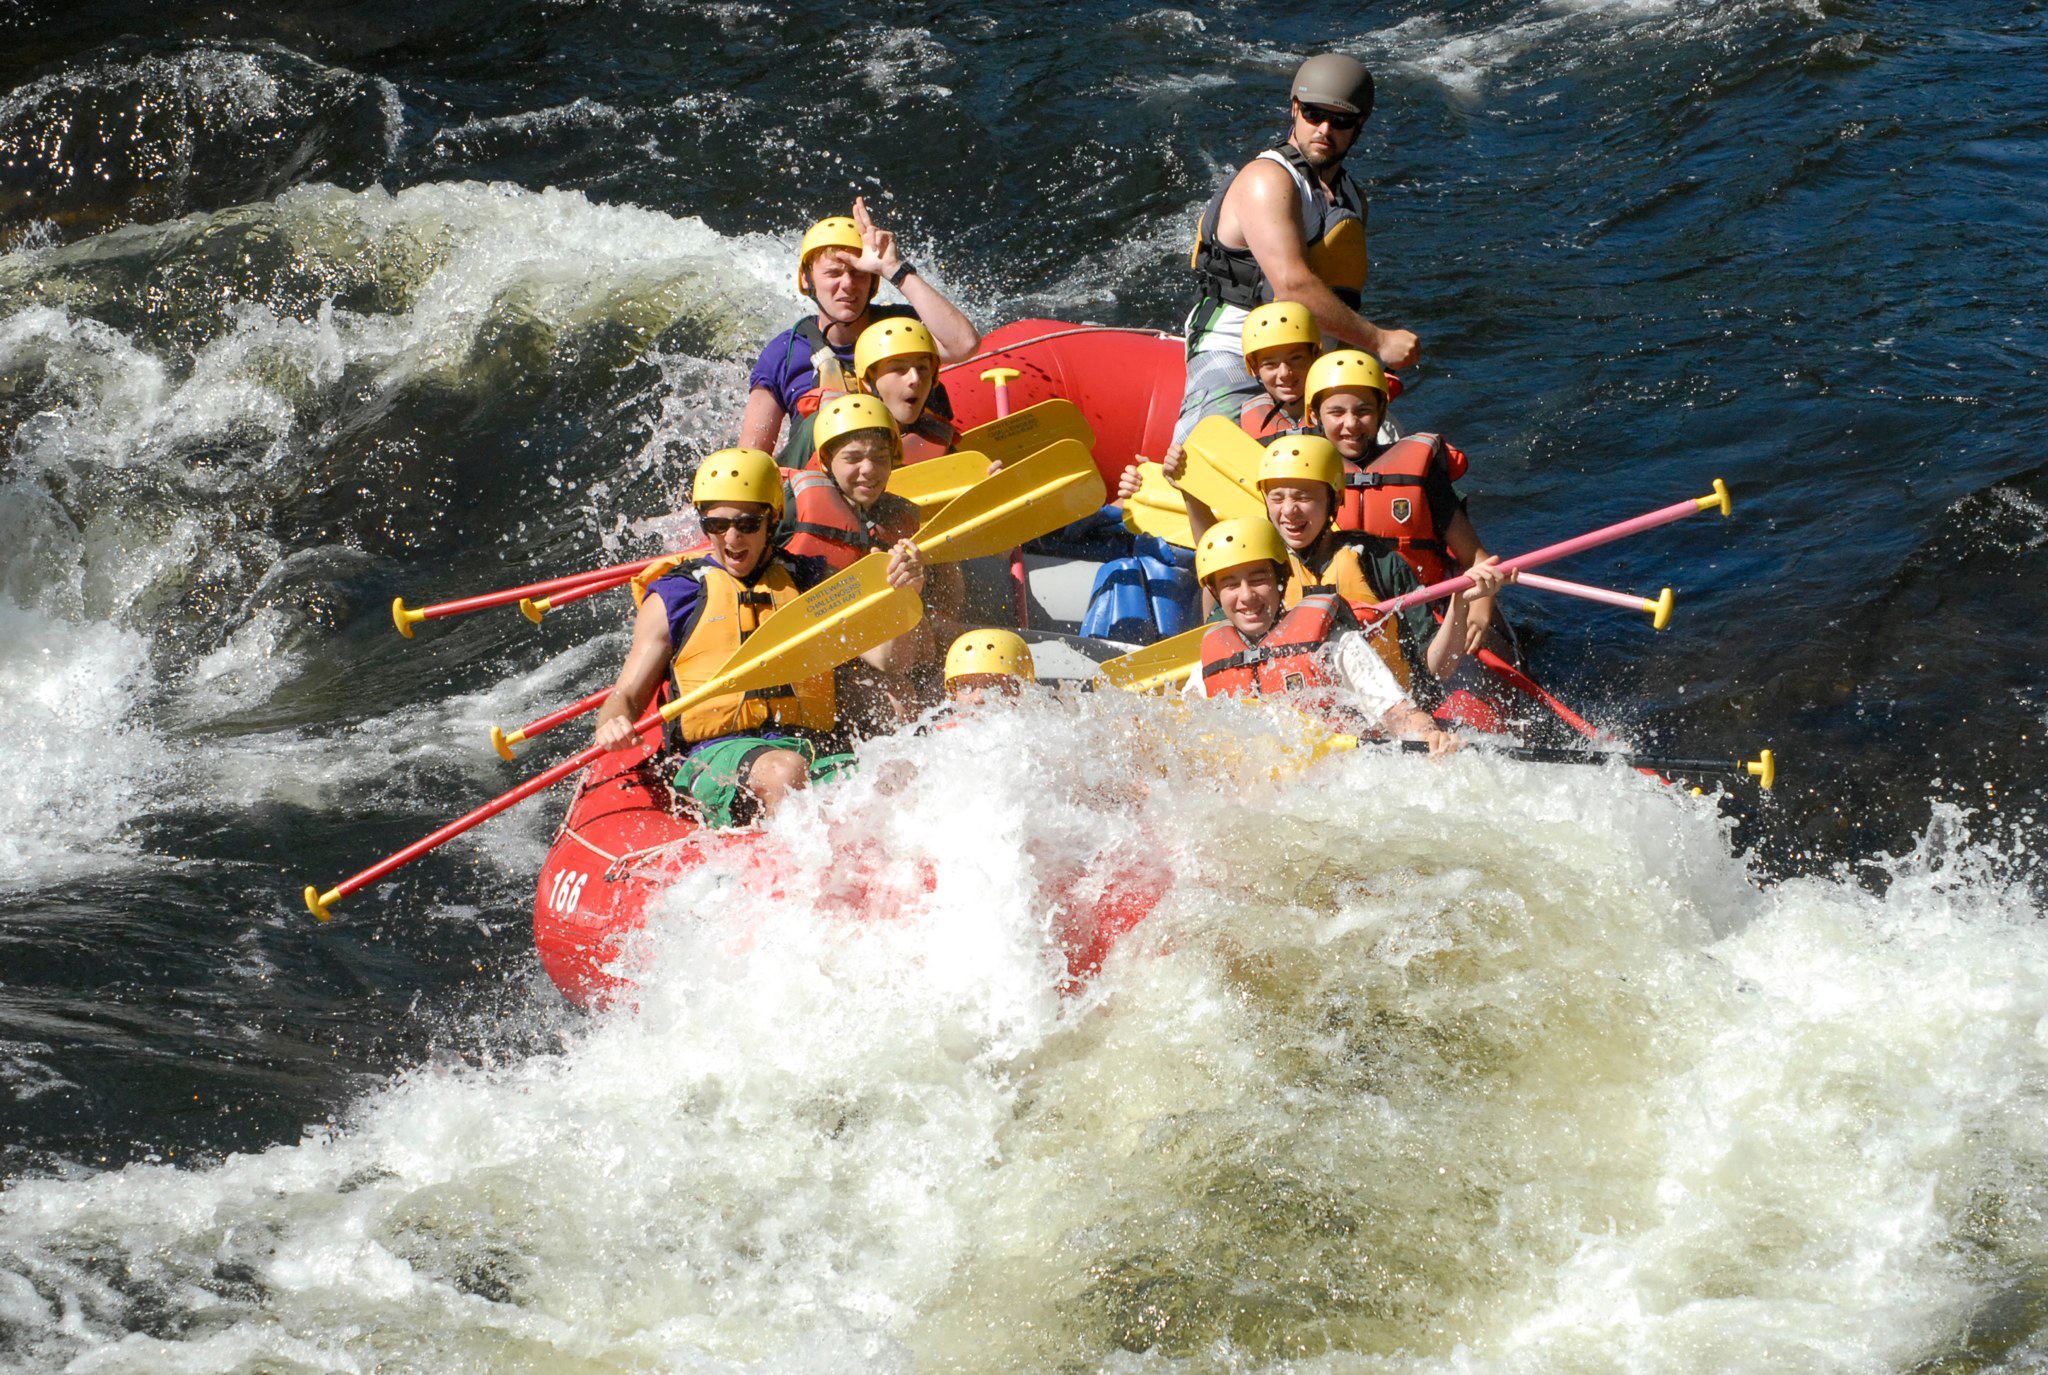 whitewater rafting on the Hudson River in the Adirondack Experience Region